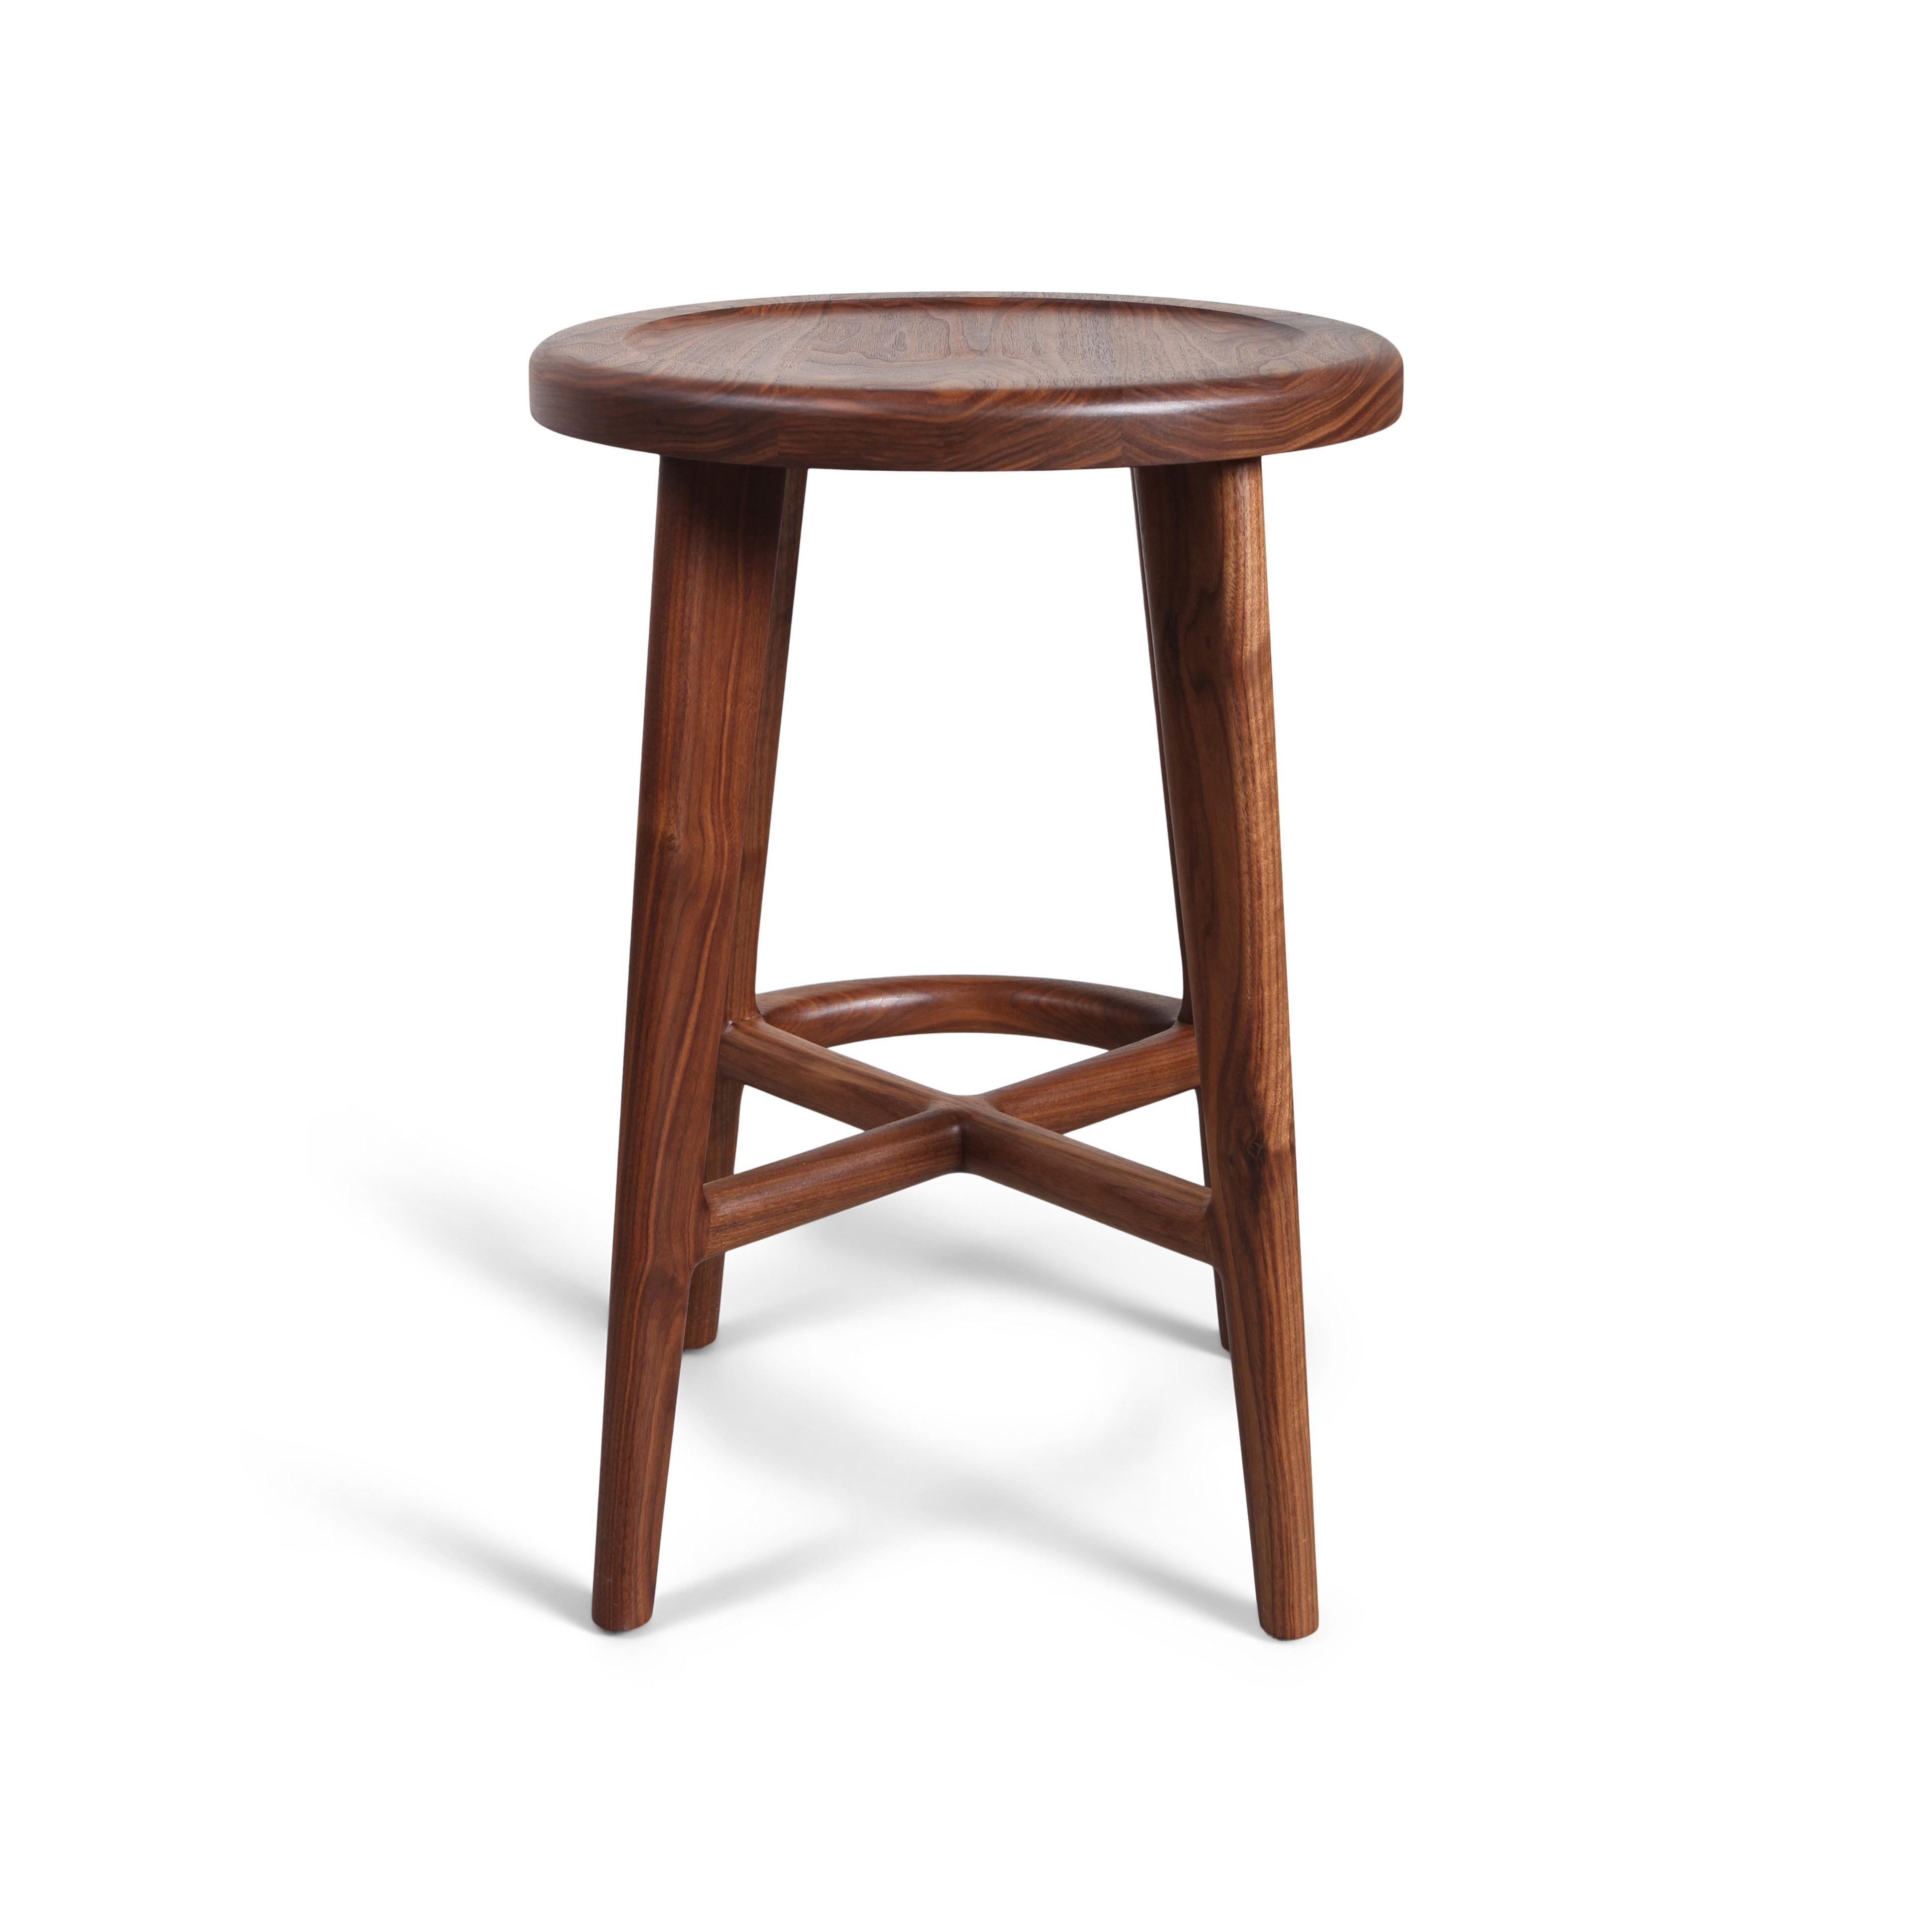 American Craftsman Handcrafted Solid Wood Bar or Counter Stool, Walnut Oak Ash For Sale